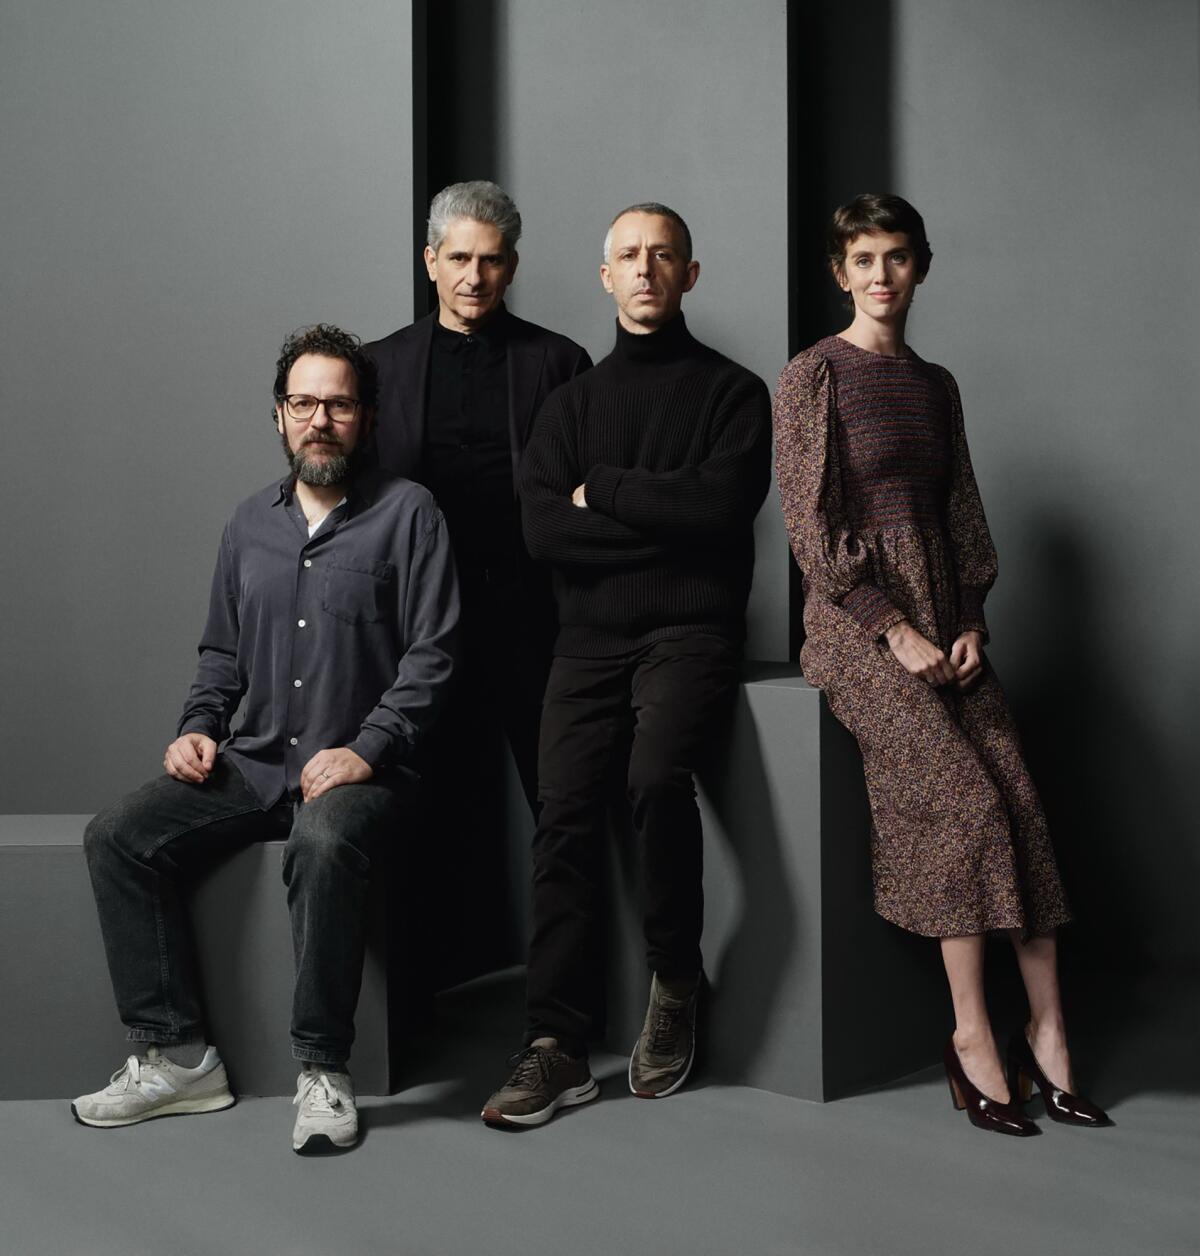 Sam Gold, from left, Michael Imperioli, Jeremy Strong and Amy Herzog,  in Ibsen's "An Enemy of the People" on Broadway.